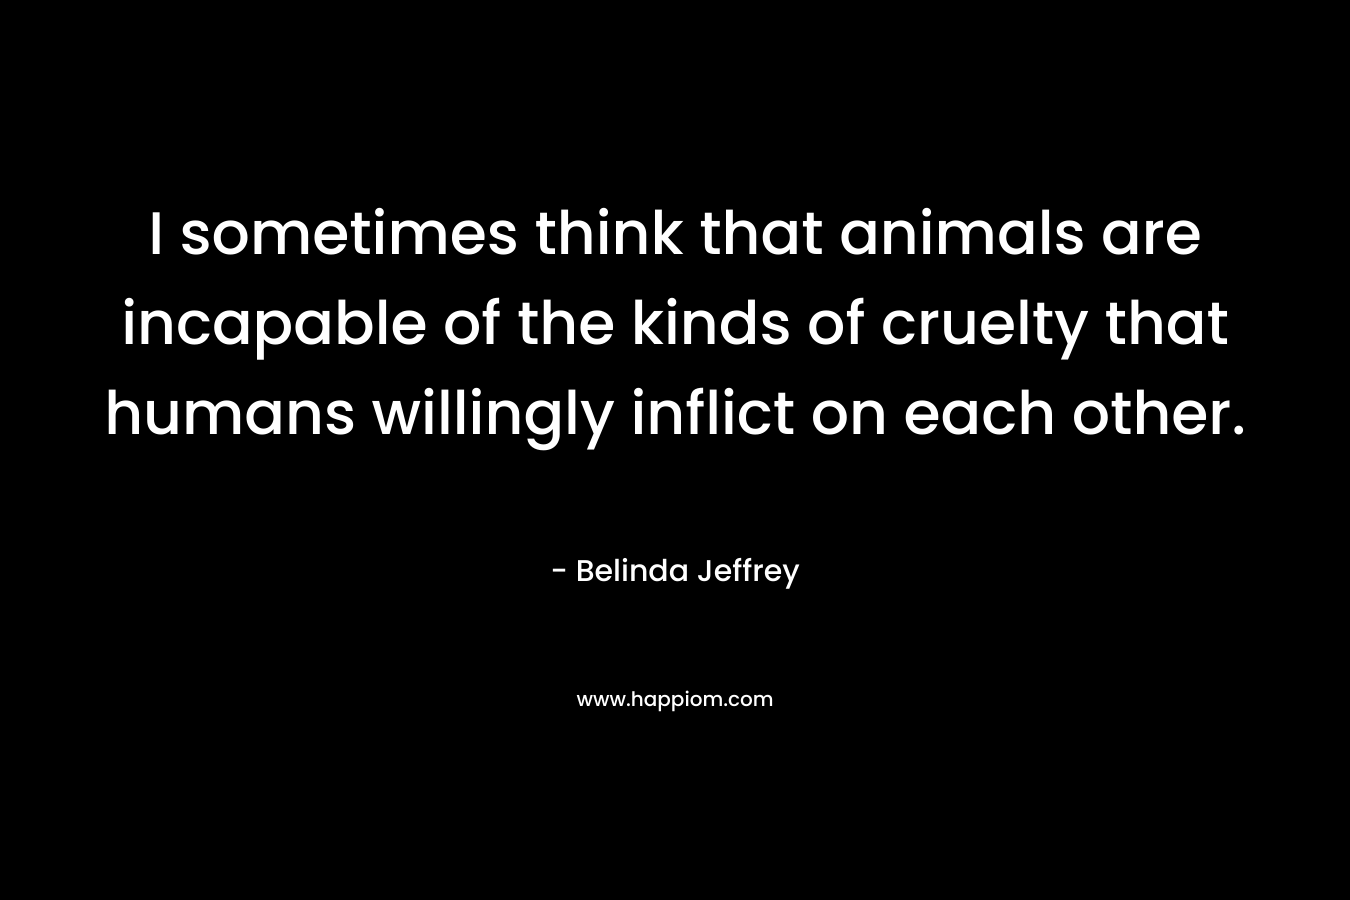 I sometimes think that animals are incapable of the kinds of cruelty that humans willingly inflict on each other. – Belinda Jeffrey